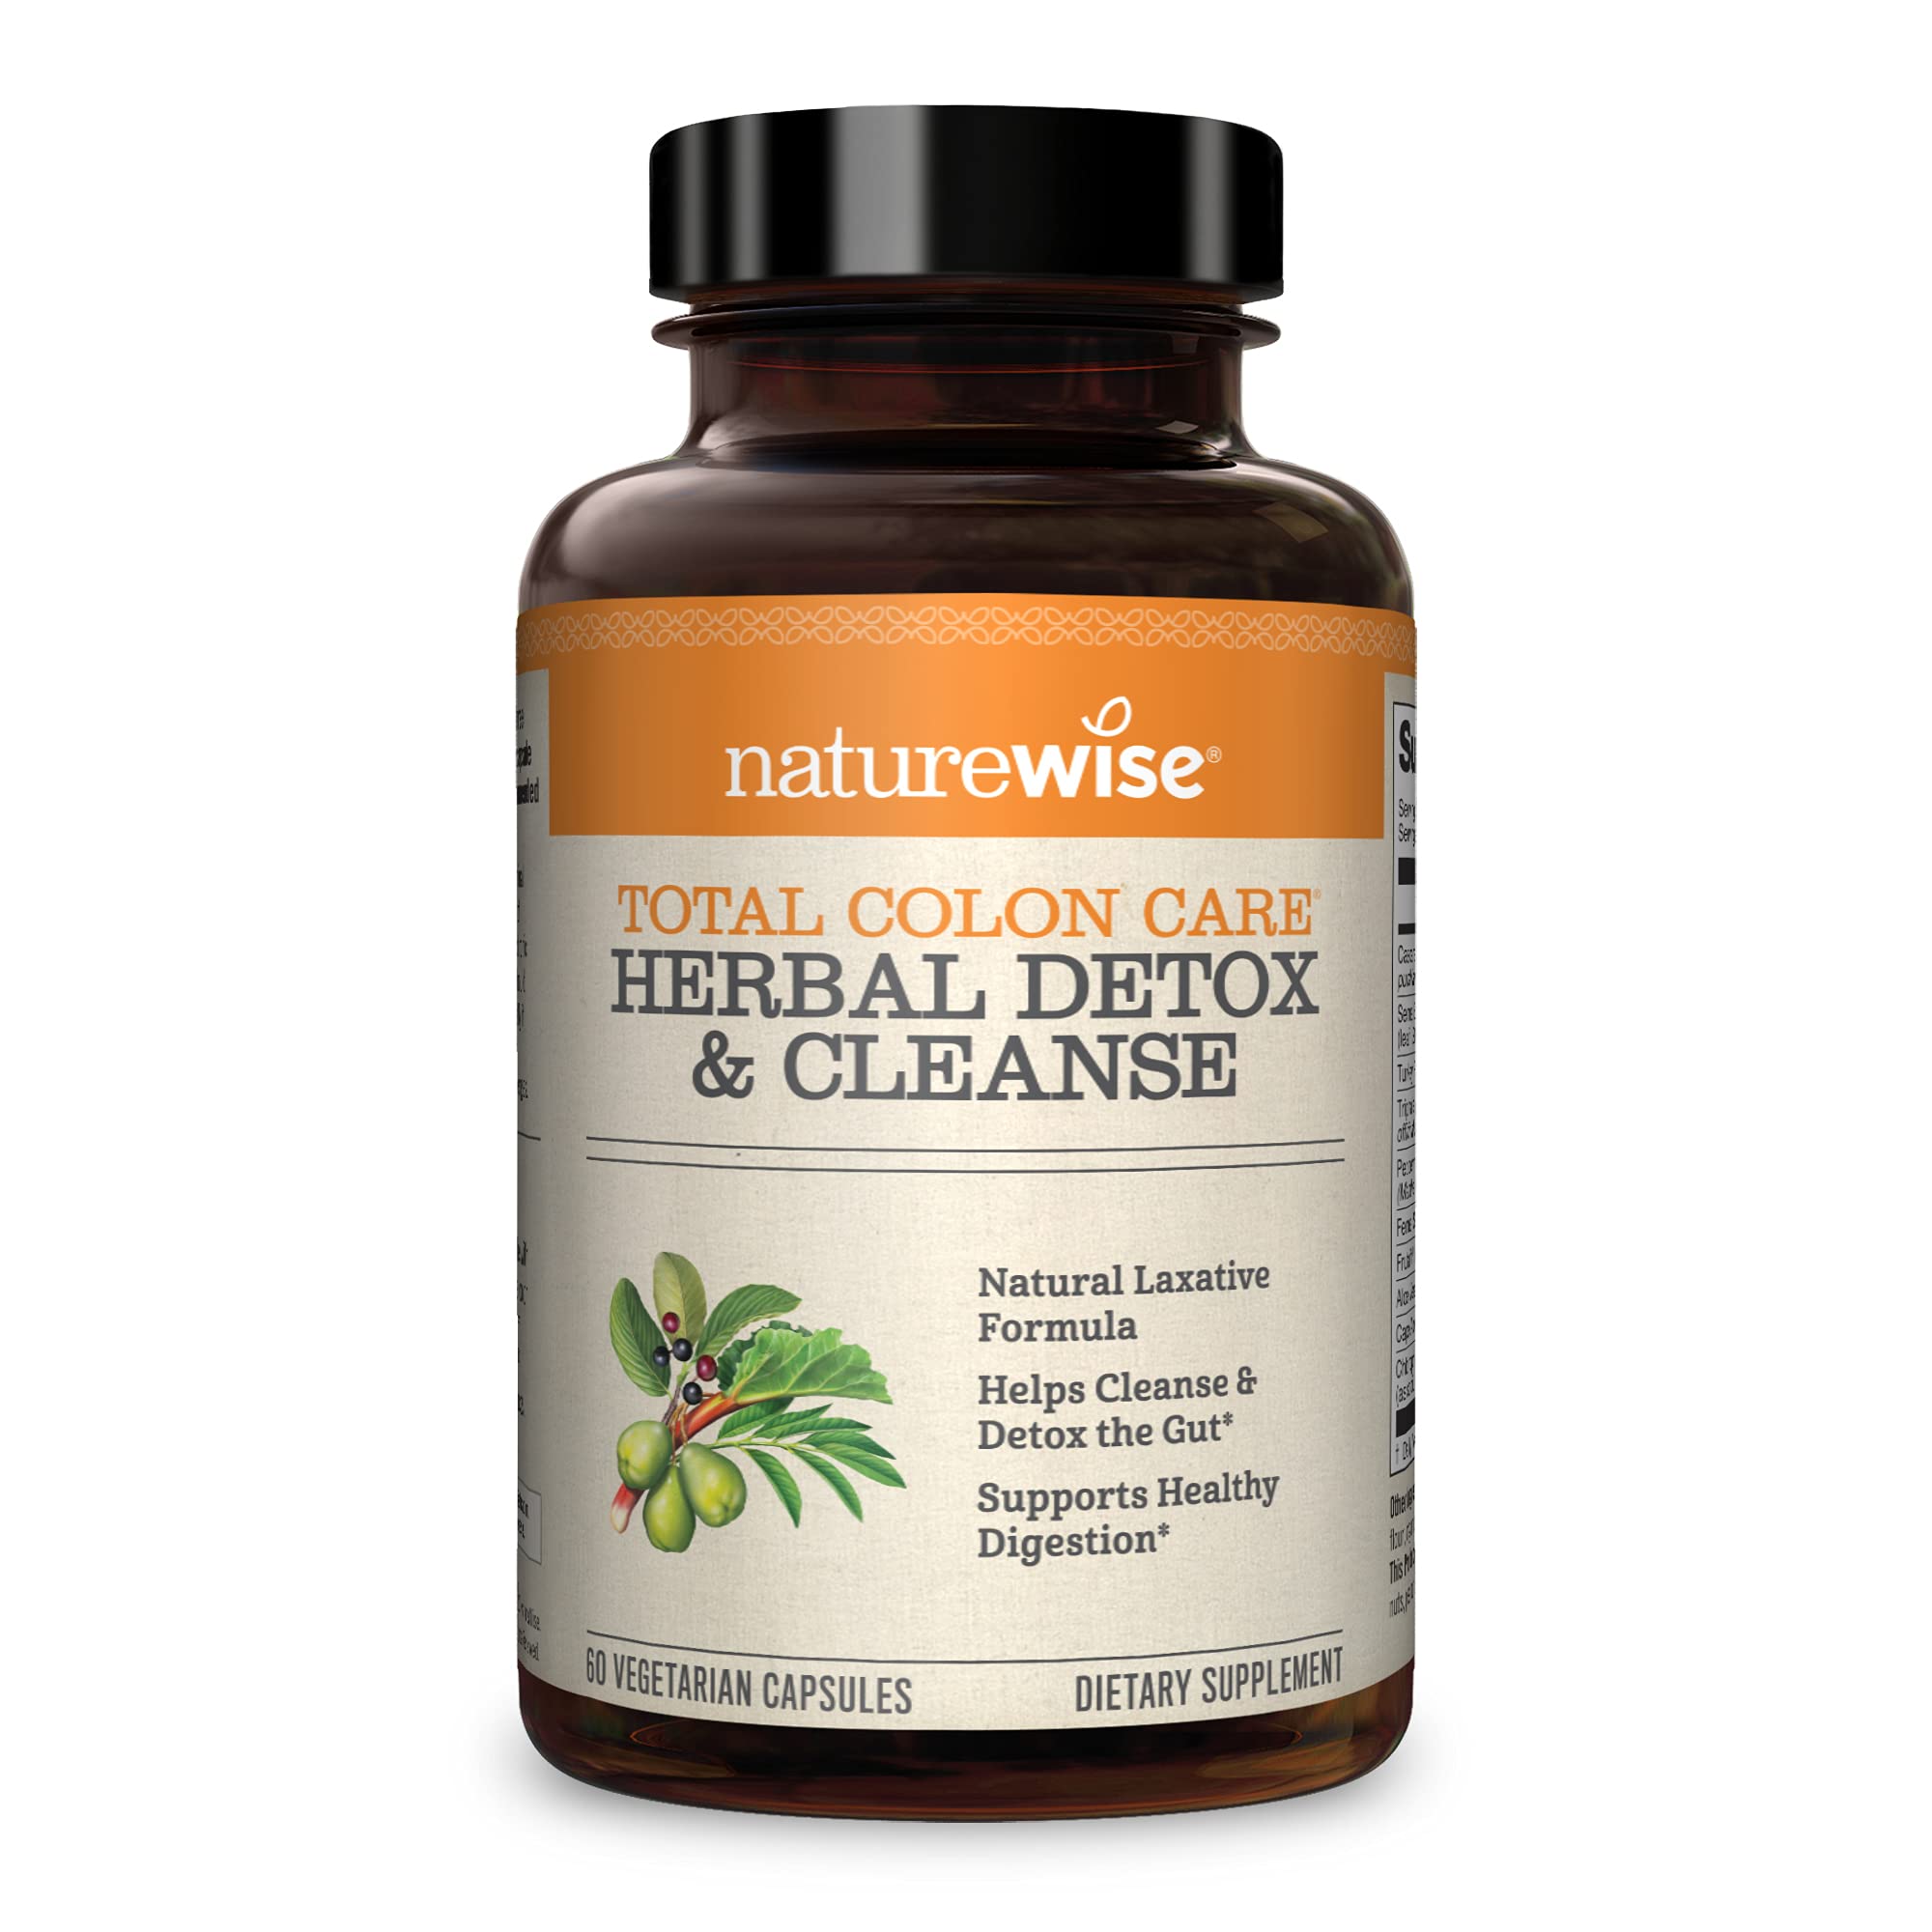 NatureWise Herbal Detox Cleanse Laxative Supplements | Natural Colon Cleanser Herb & Fiber Blend for Constipation Relief, Toxin Rid, Gut Health, & Weight Loss Support [1 Month Supply - 60 Capsules]